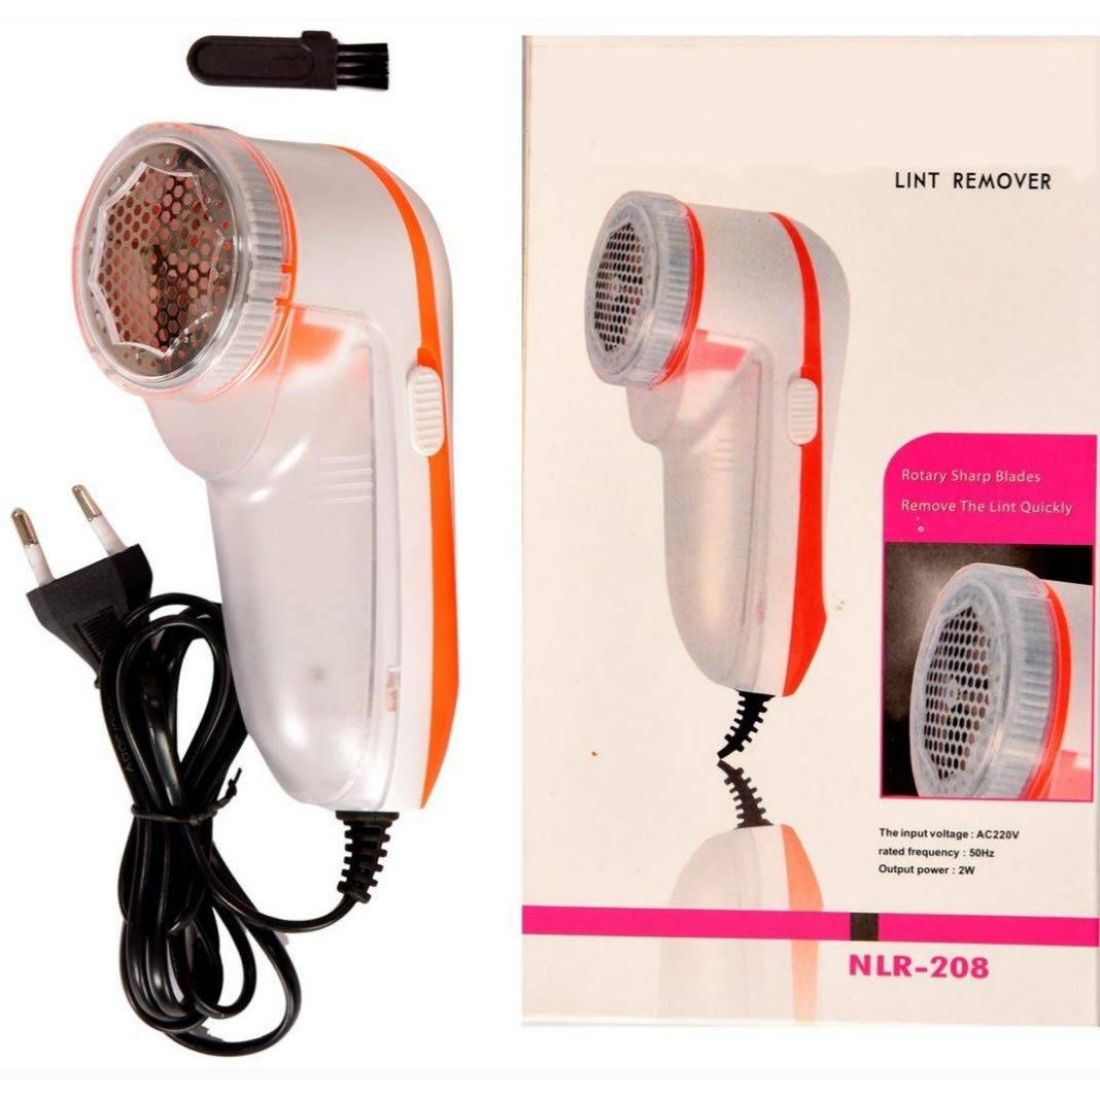 Corded Honeycomb Design Lint Remover, Efficient Fabric Revitalization Tool for Garment Care